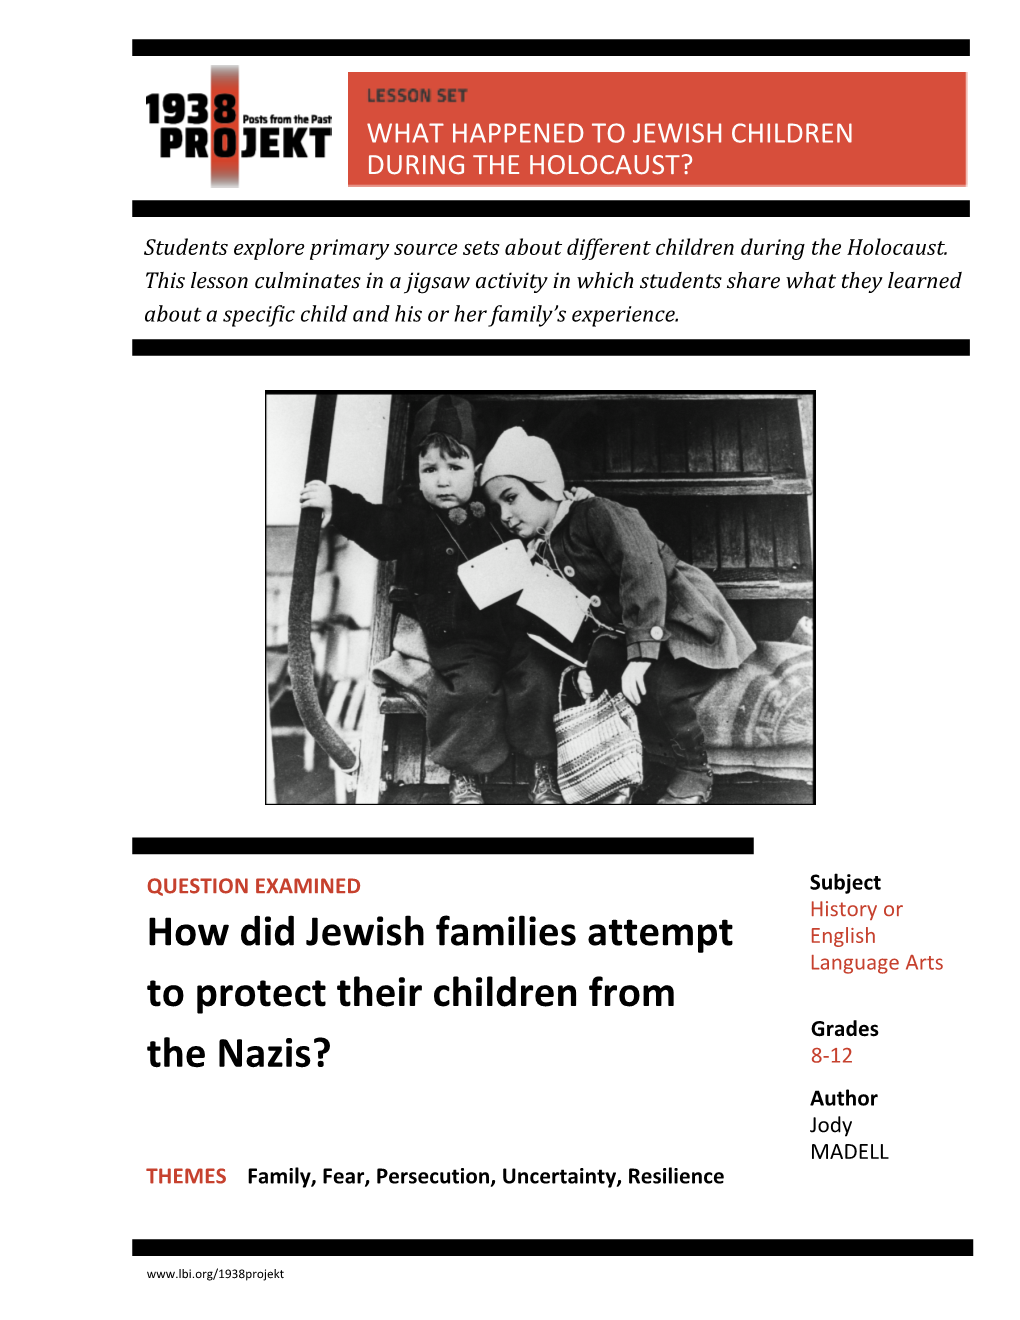 What Happened to Jewish Children During the Holocaust?